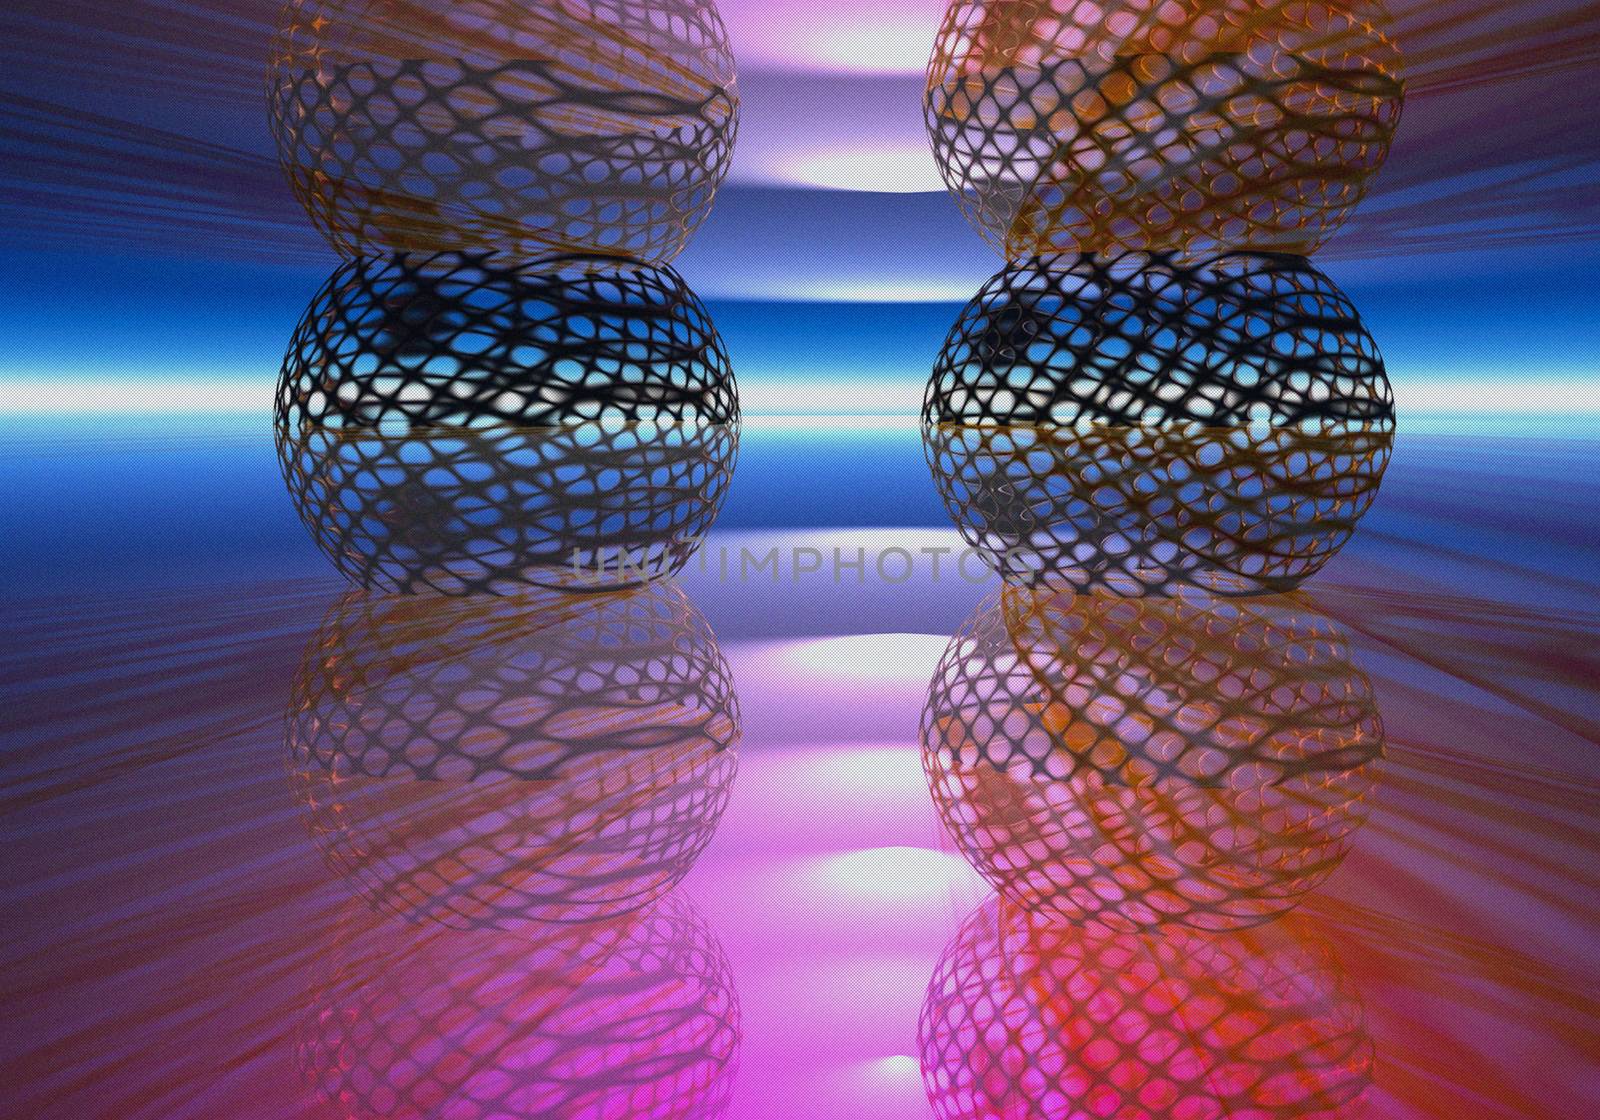 3d image of abstract textured scene with round structural objects that are on the illuminated podium